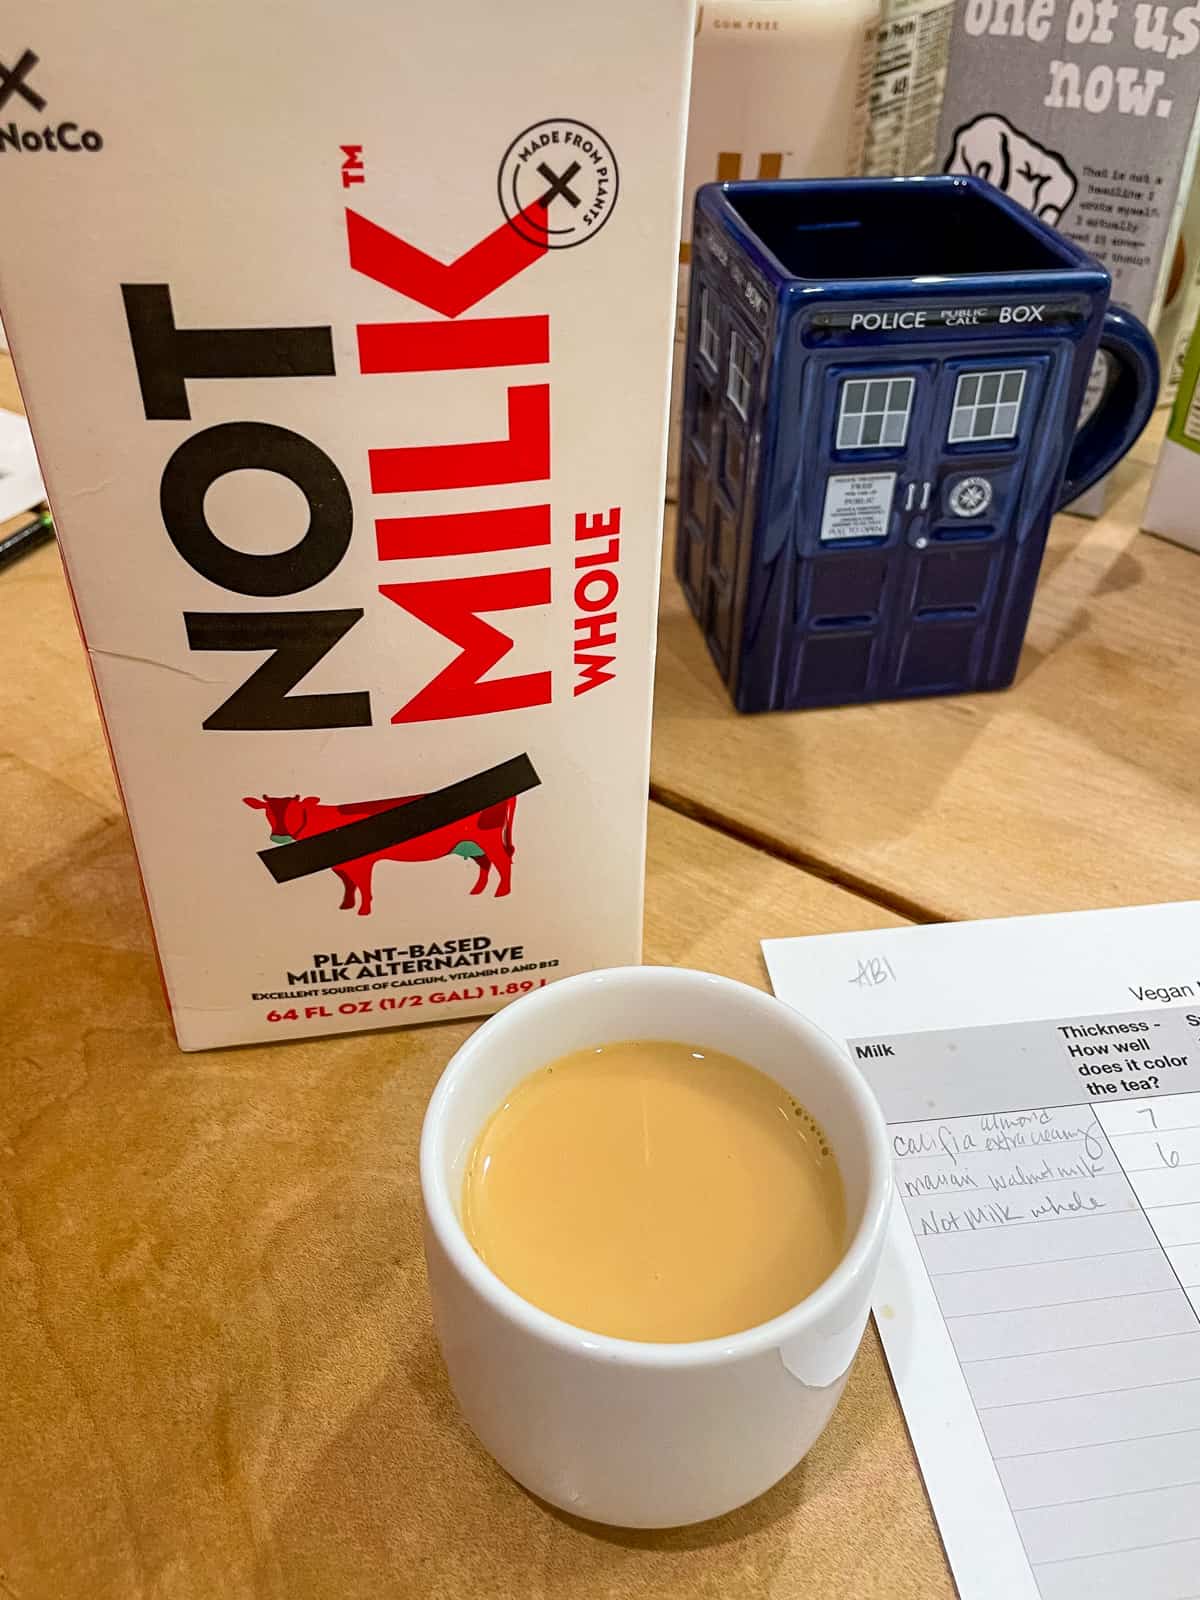 carton of not milk whole with cup of black tea in front